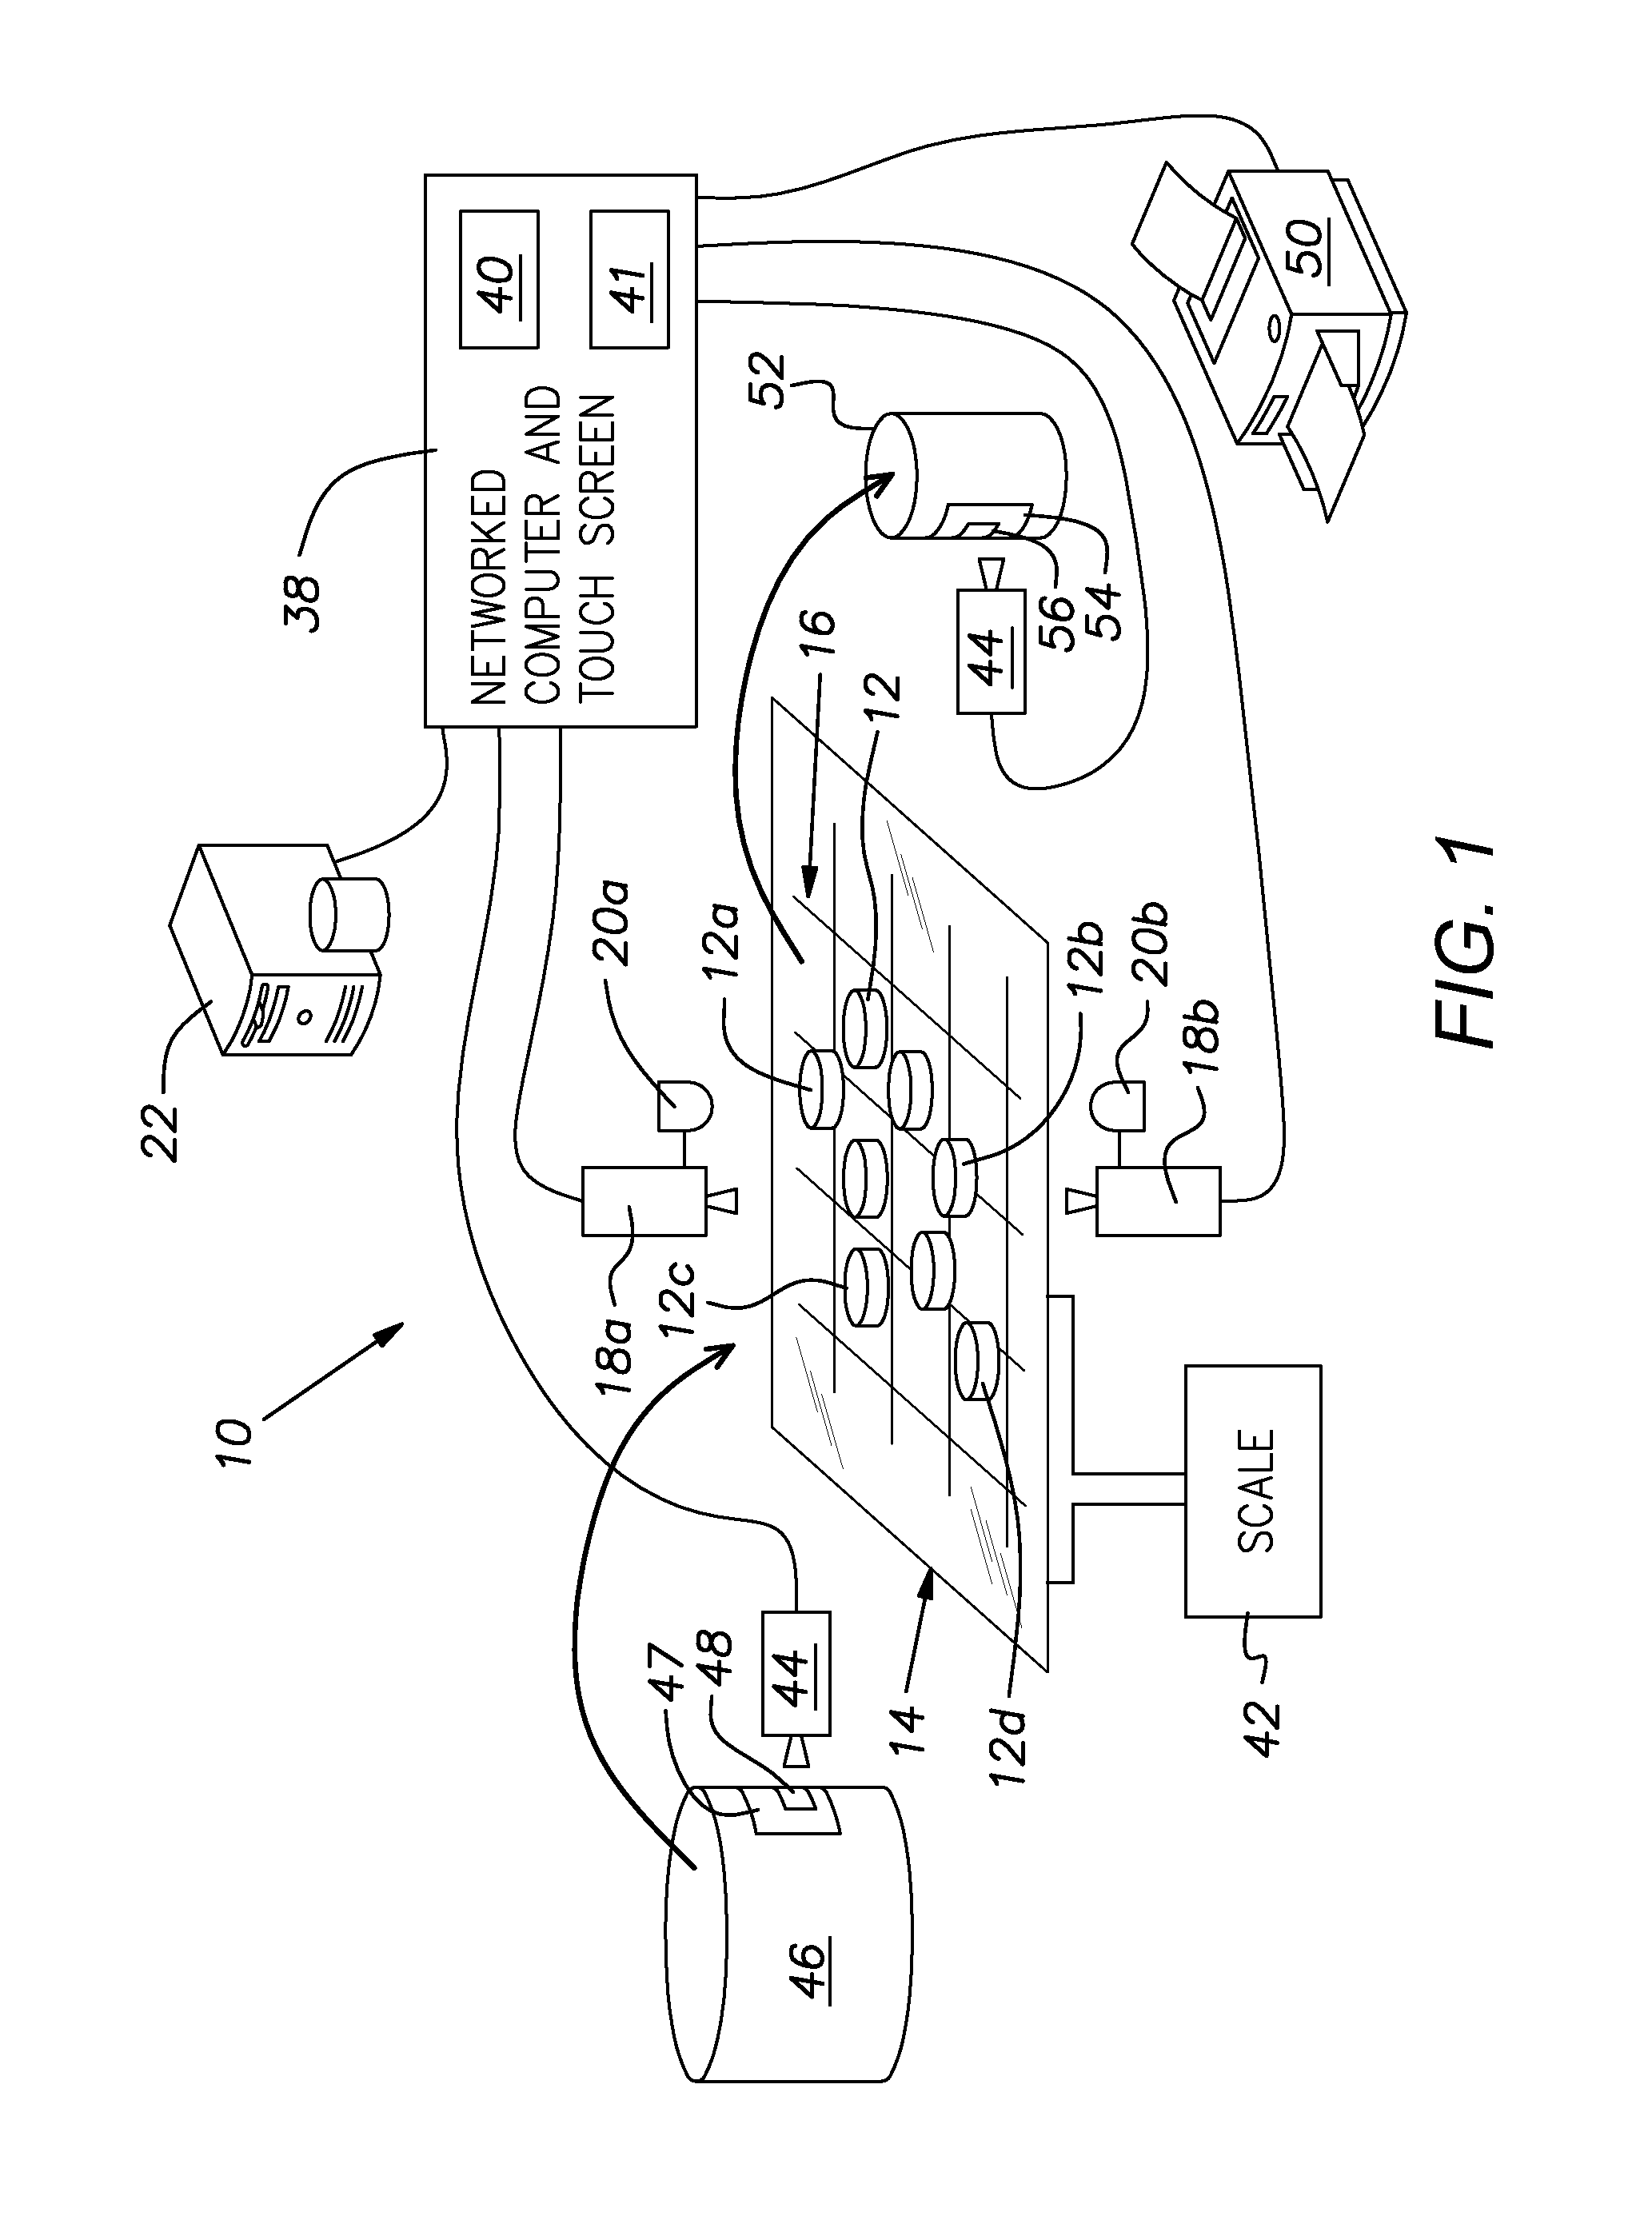 Medicinal substance recognition system and method